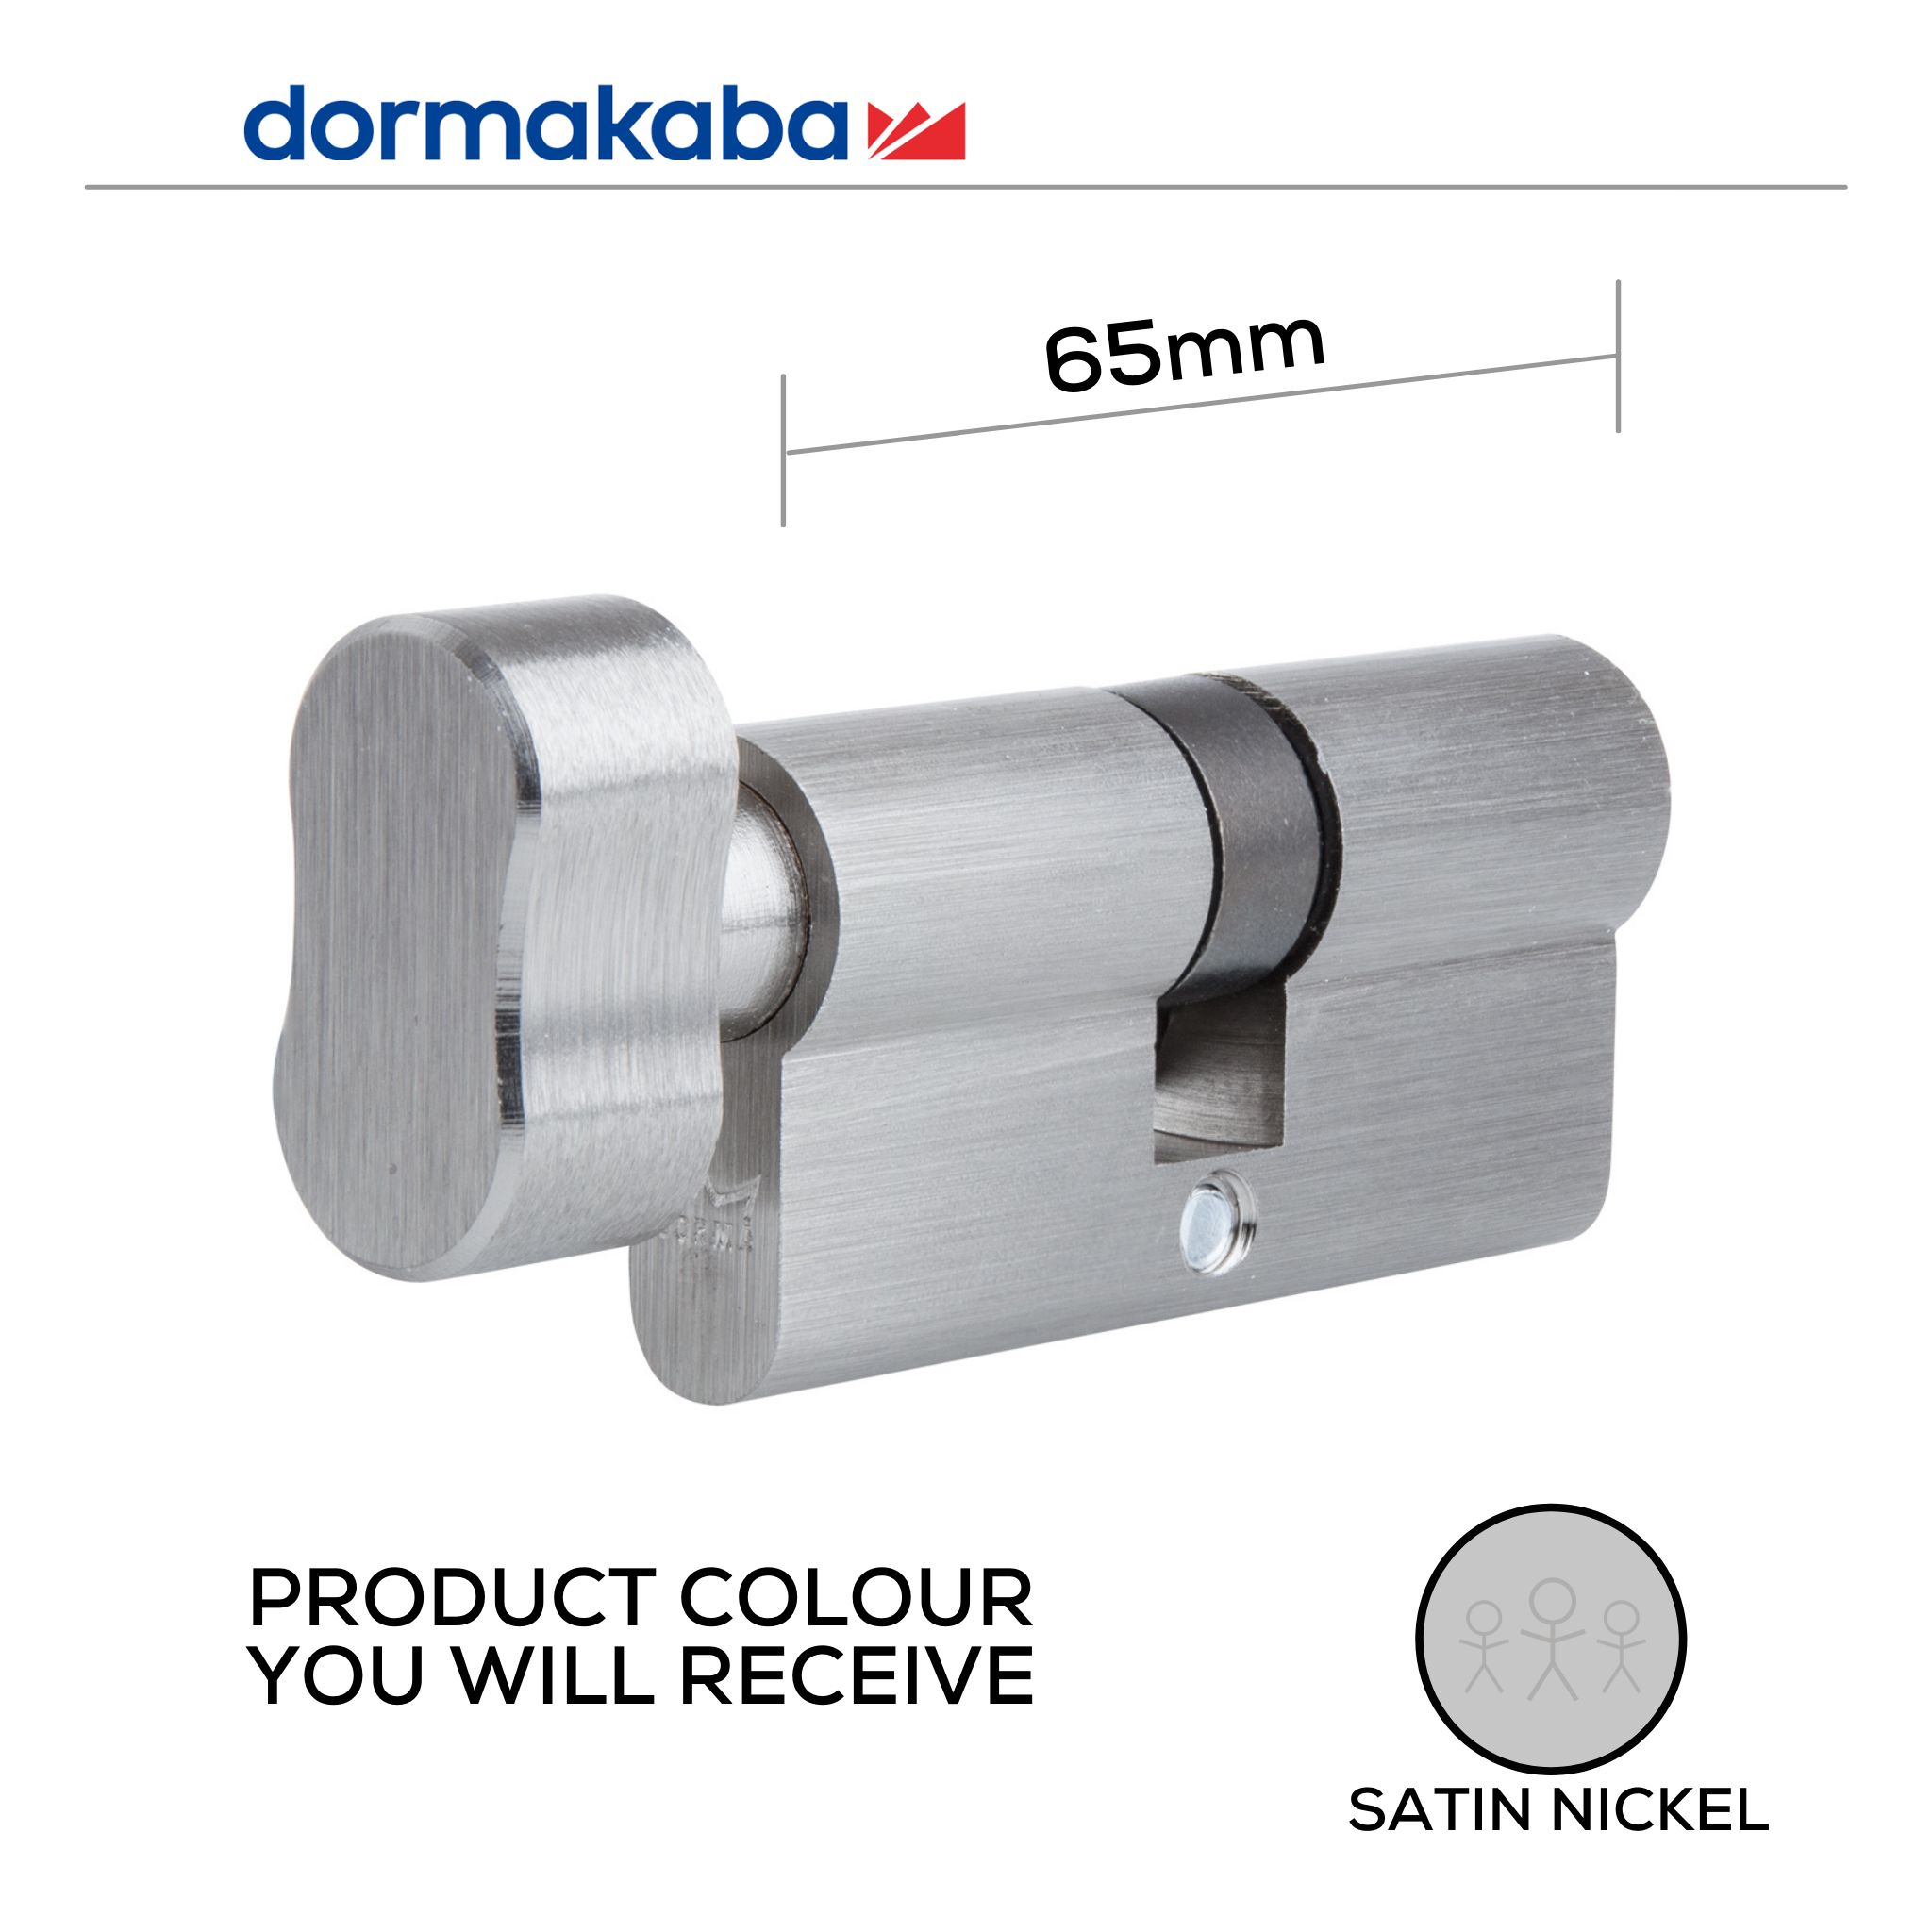 DKC056501 KD, 65mm - 33/33, Double Cylinder, Thumbturn to Key, Keyed to Differ (Standard), 2 Keys, 5 Pin, Satin Nickel, DORMAKABA